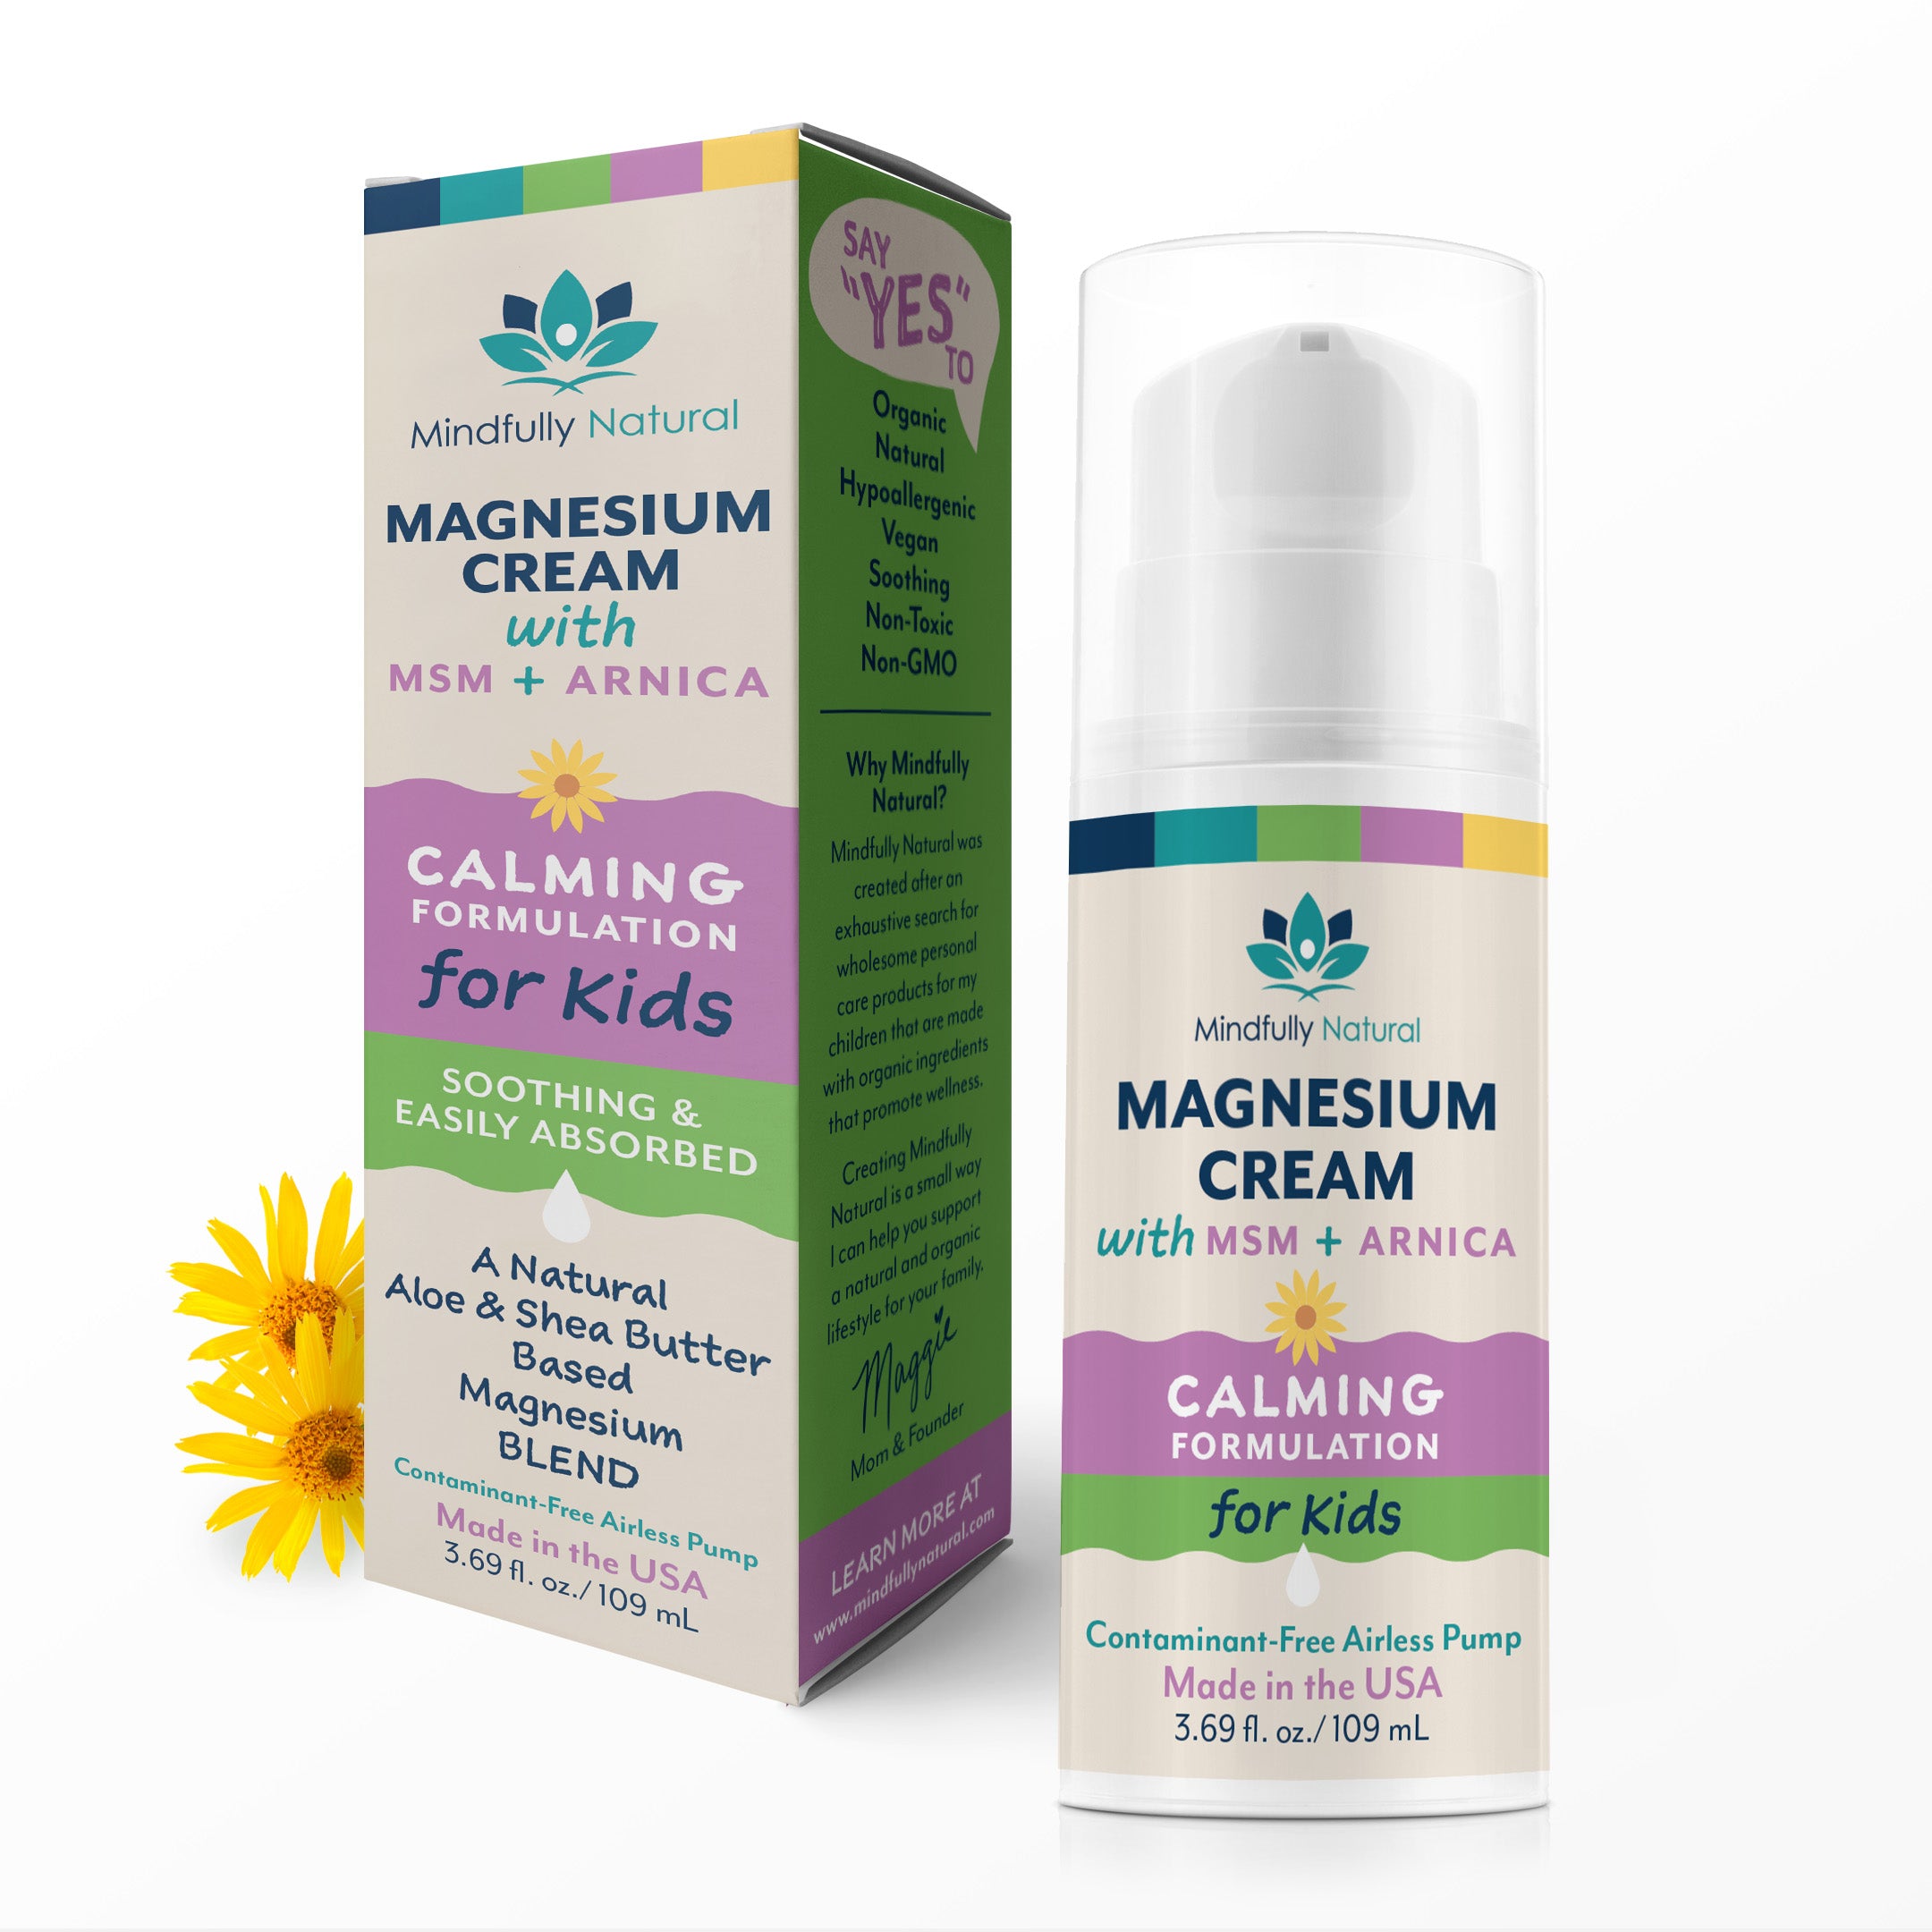 Magnesium cream for kids, magnesium lotion, mindfully natural